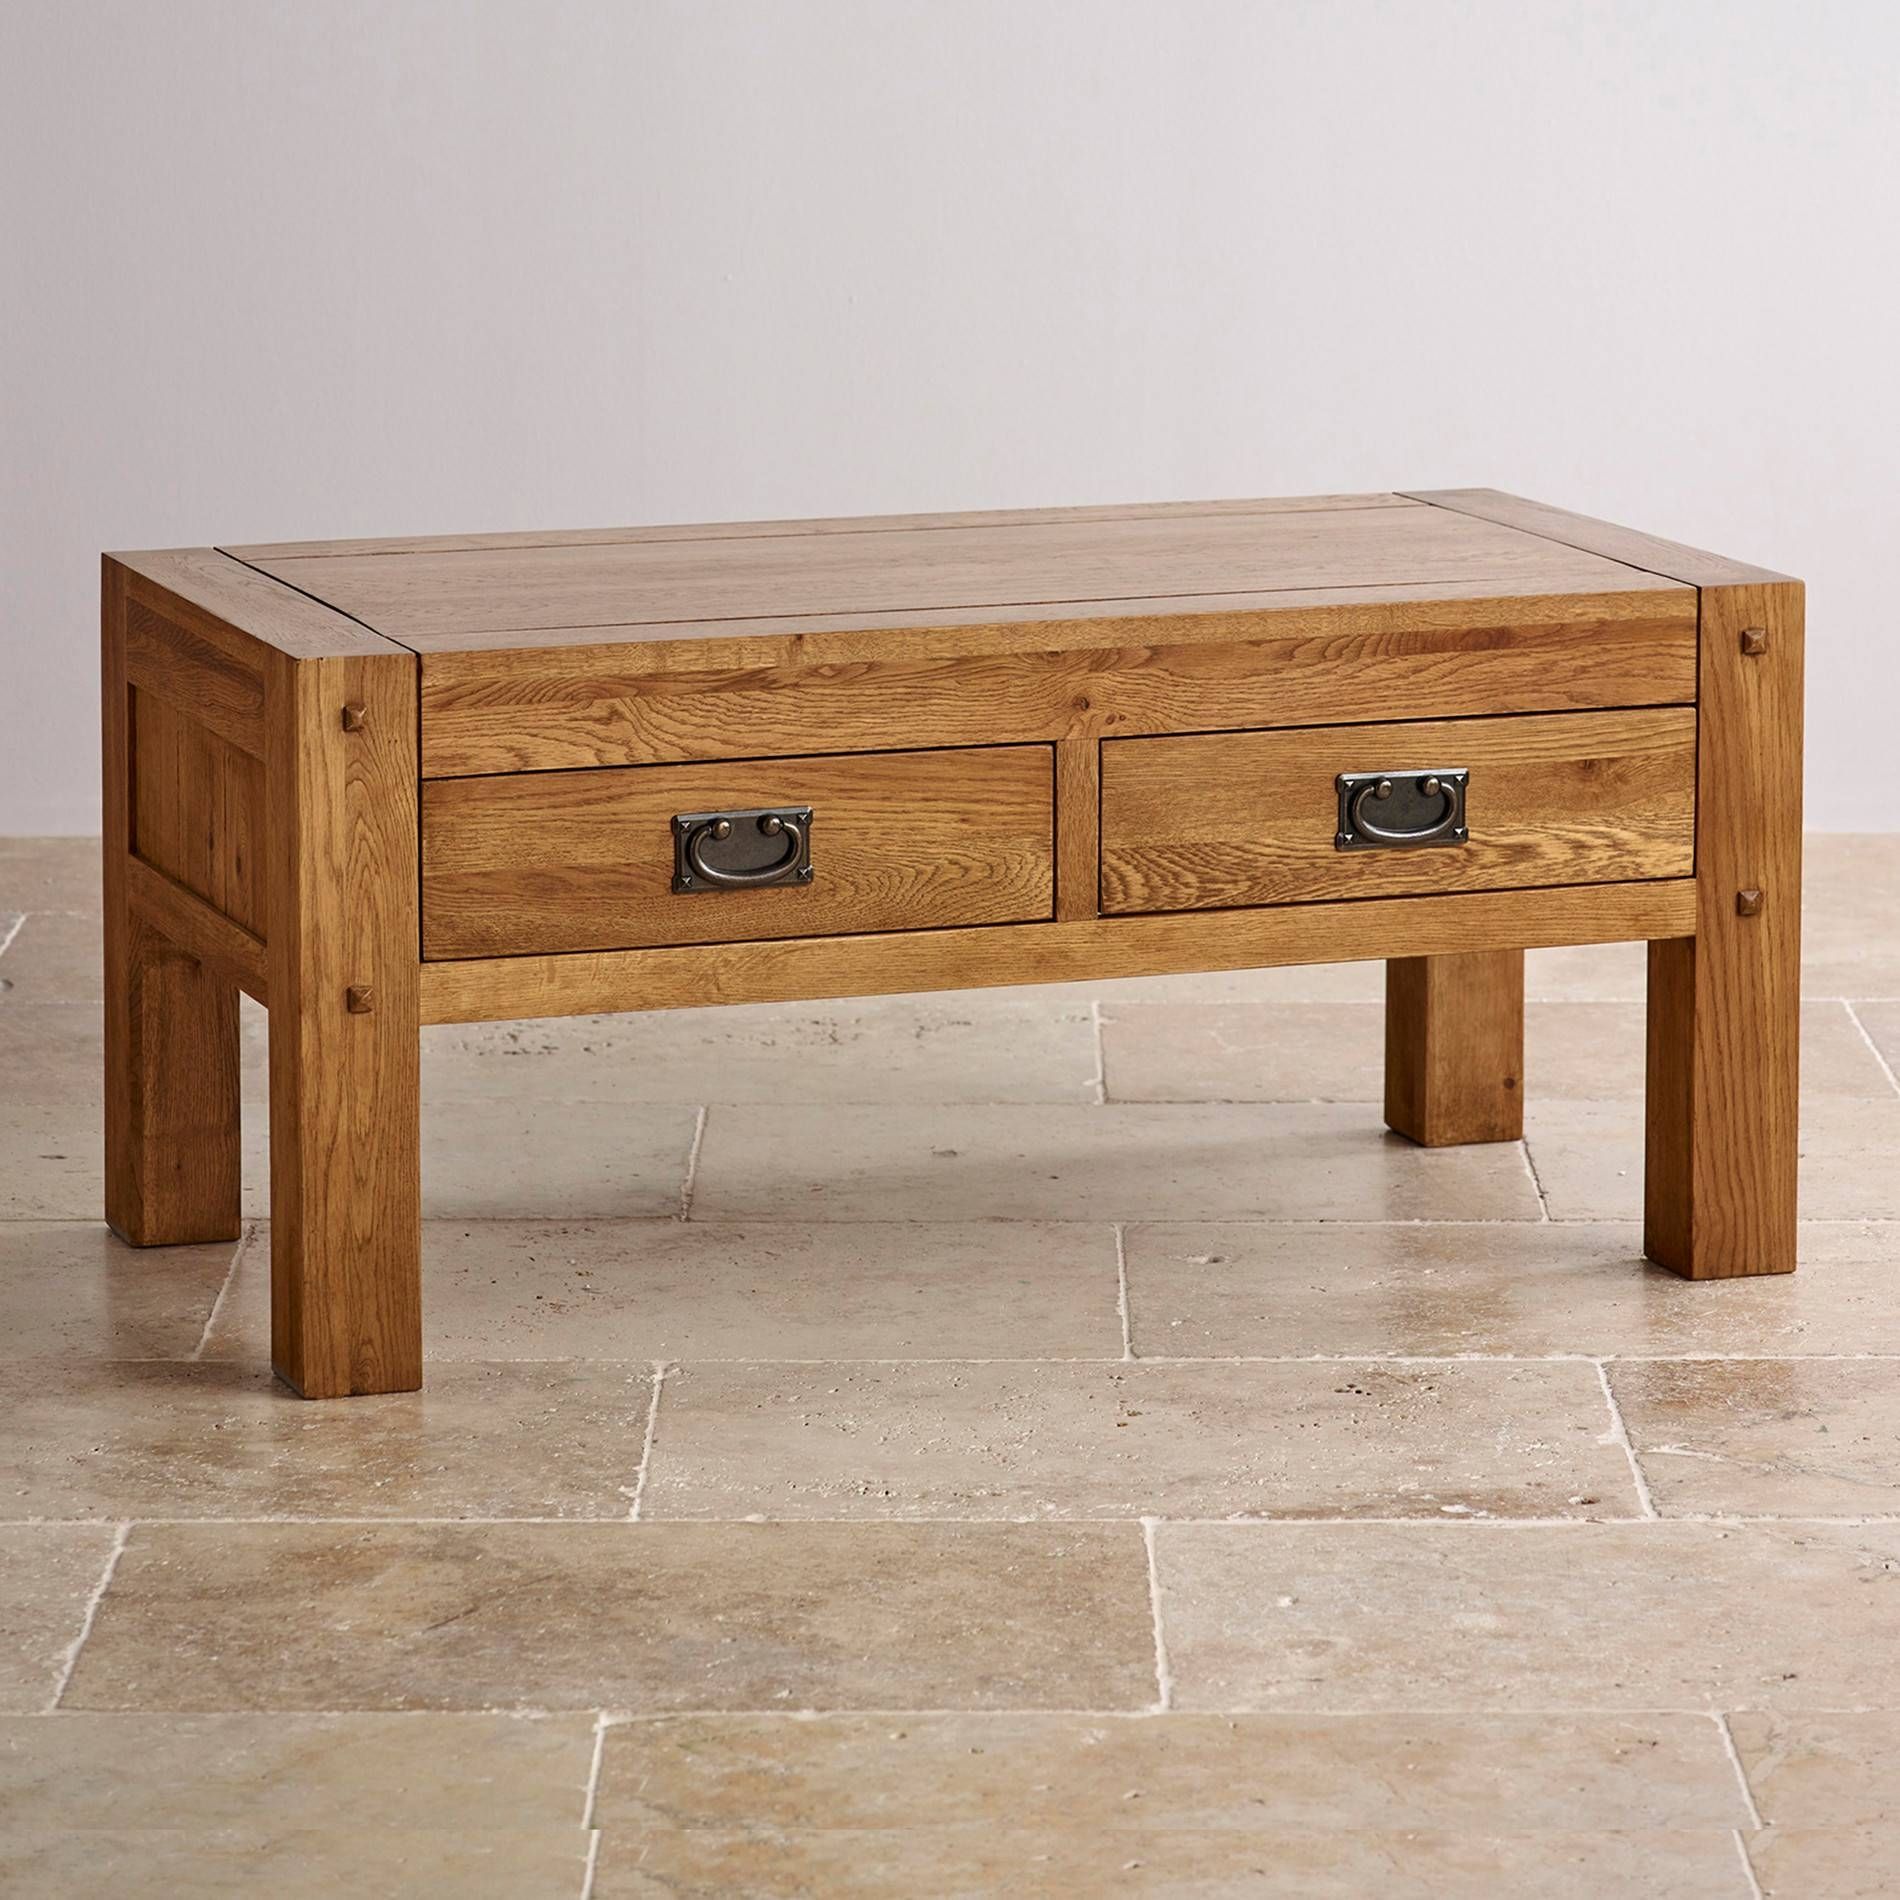 Quercus Coffee Table | Rustic Solid Oak | Oak Furniture Land Within Rustic Oak Coffee Tables (View 10 of 15)